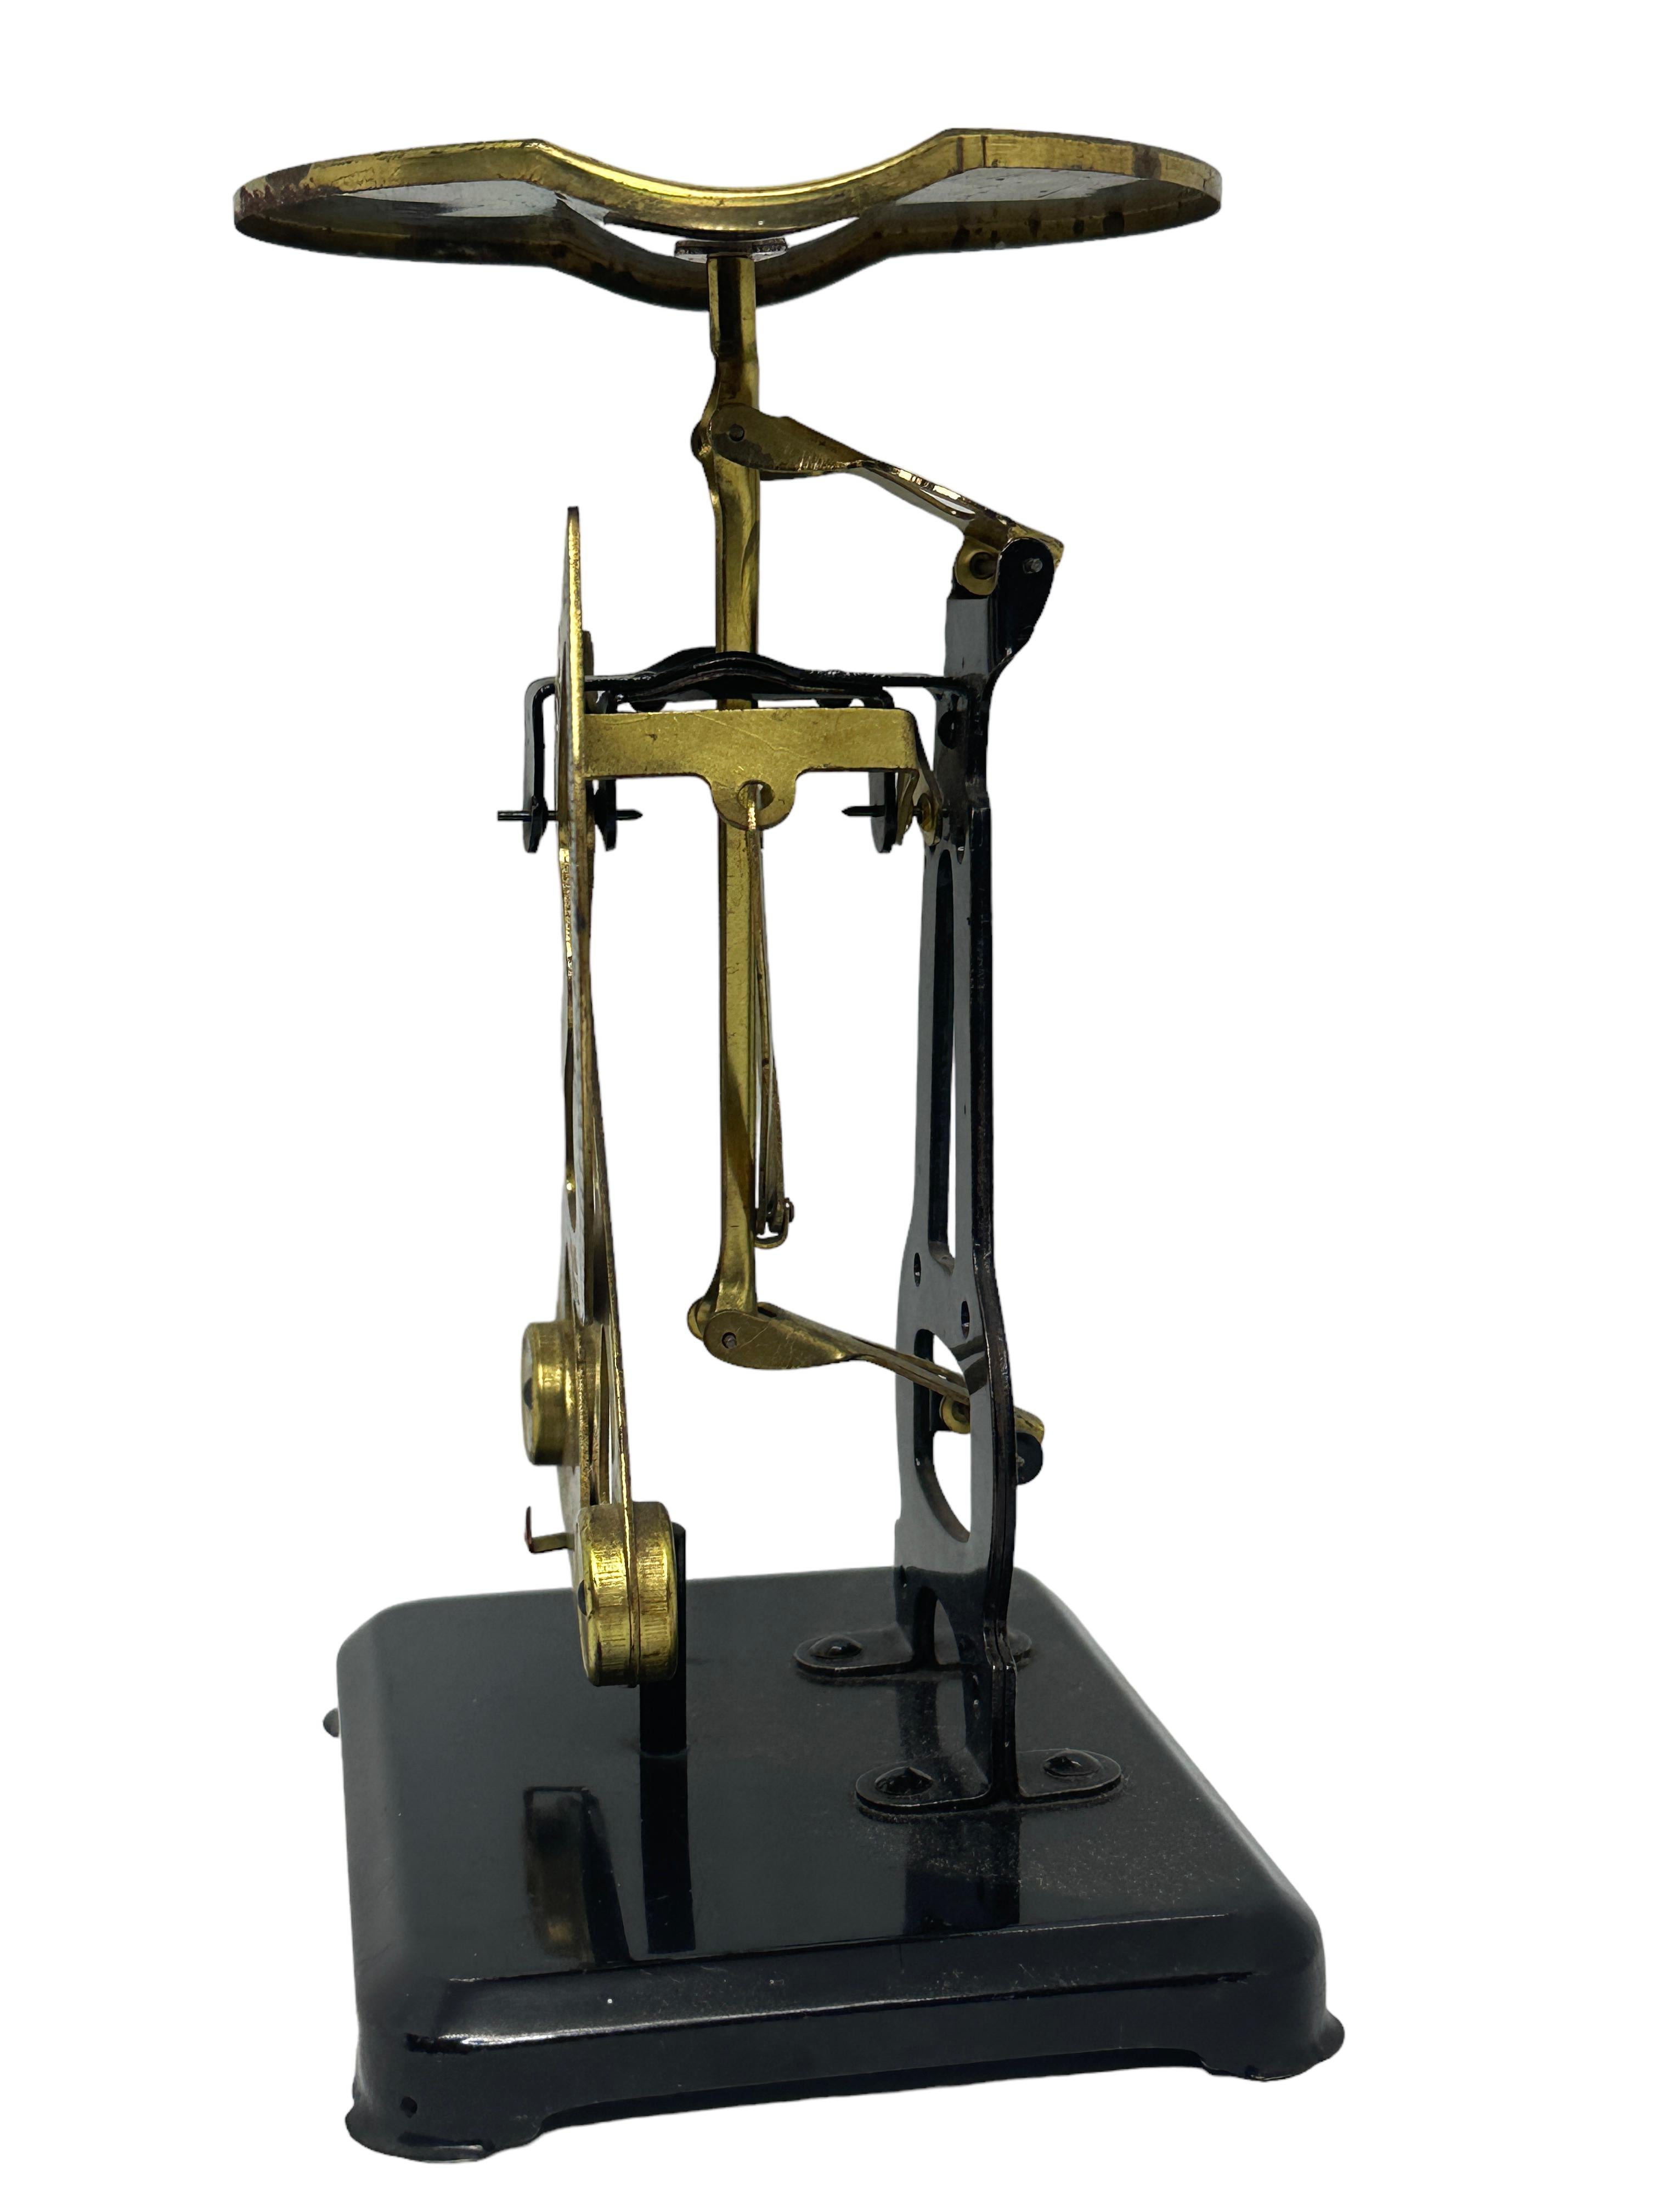 Beautiful Vintage Post Office Scale from Columbus Bilateral 1920's. Old original post letter balance scale, Antique Postal Brass Tin Bilateral Scale. Nice item for your writing desk or just as a display item at your cupboard.